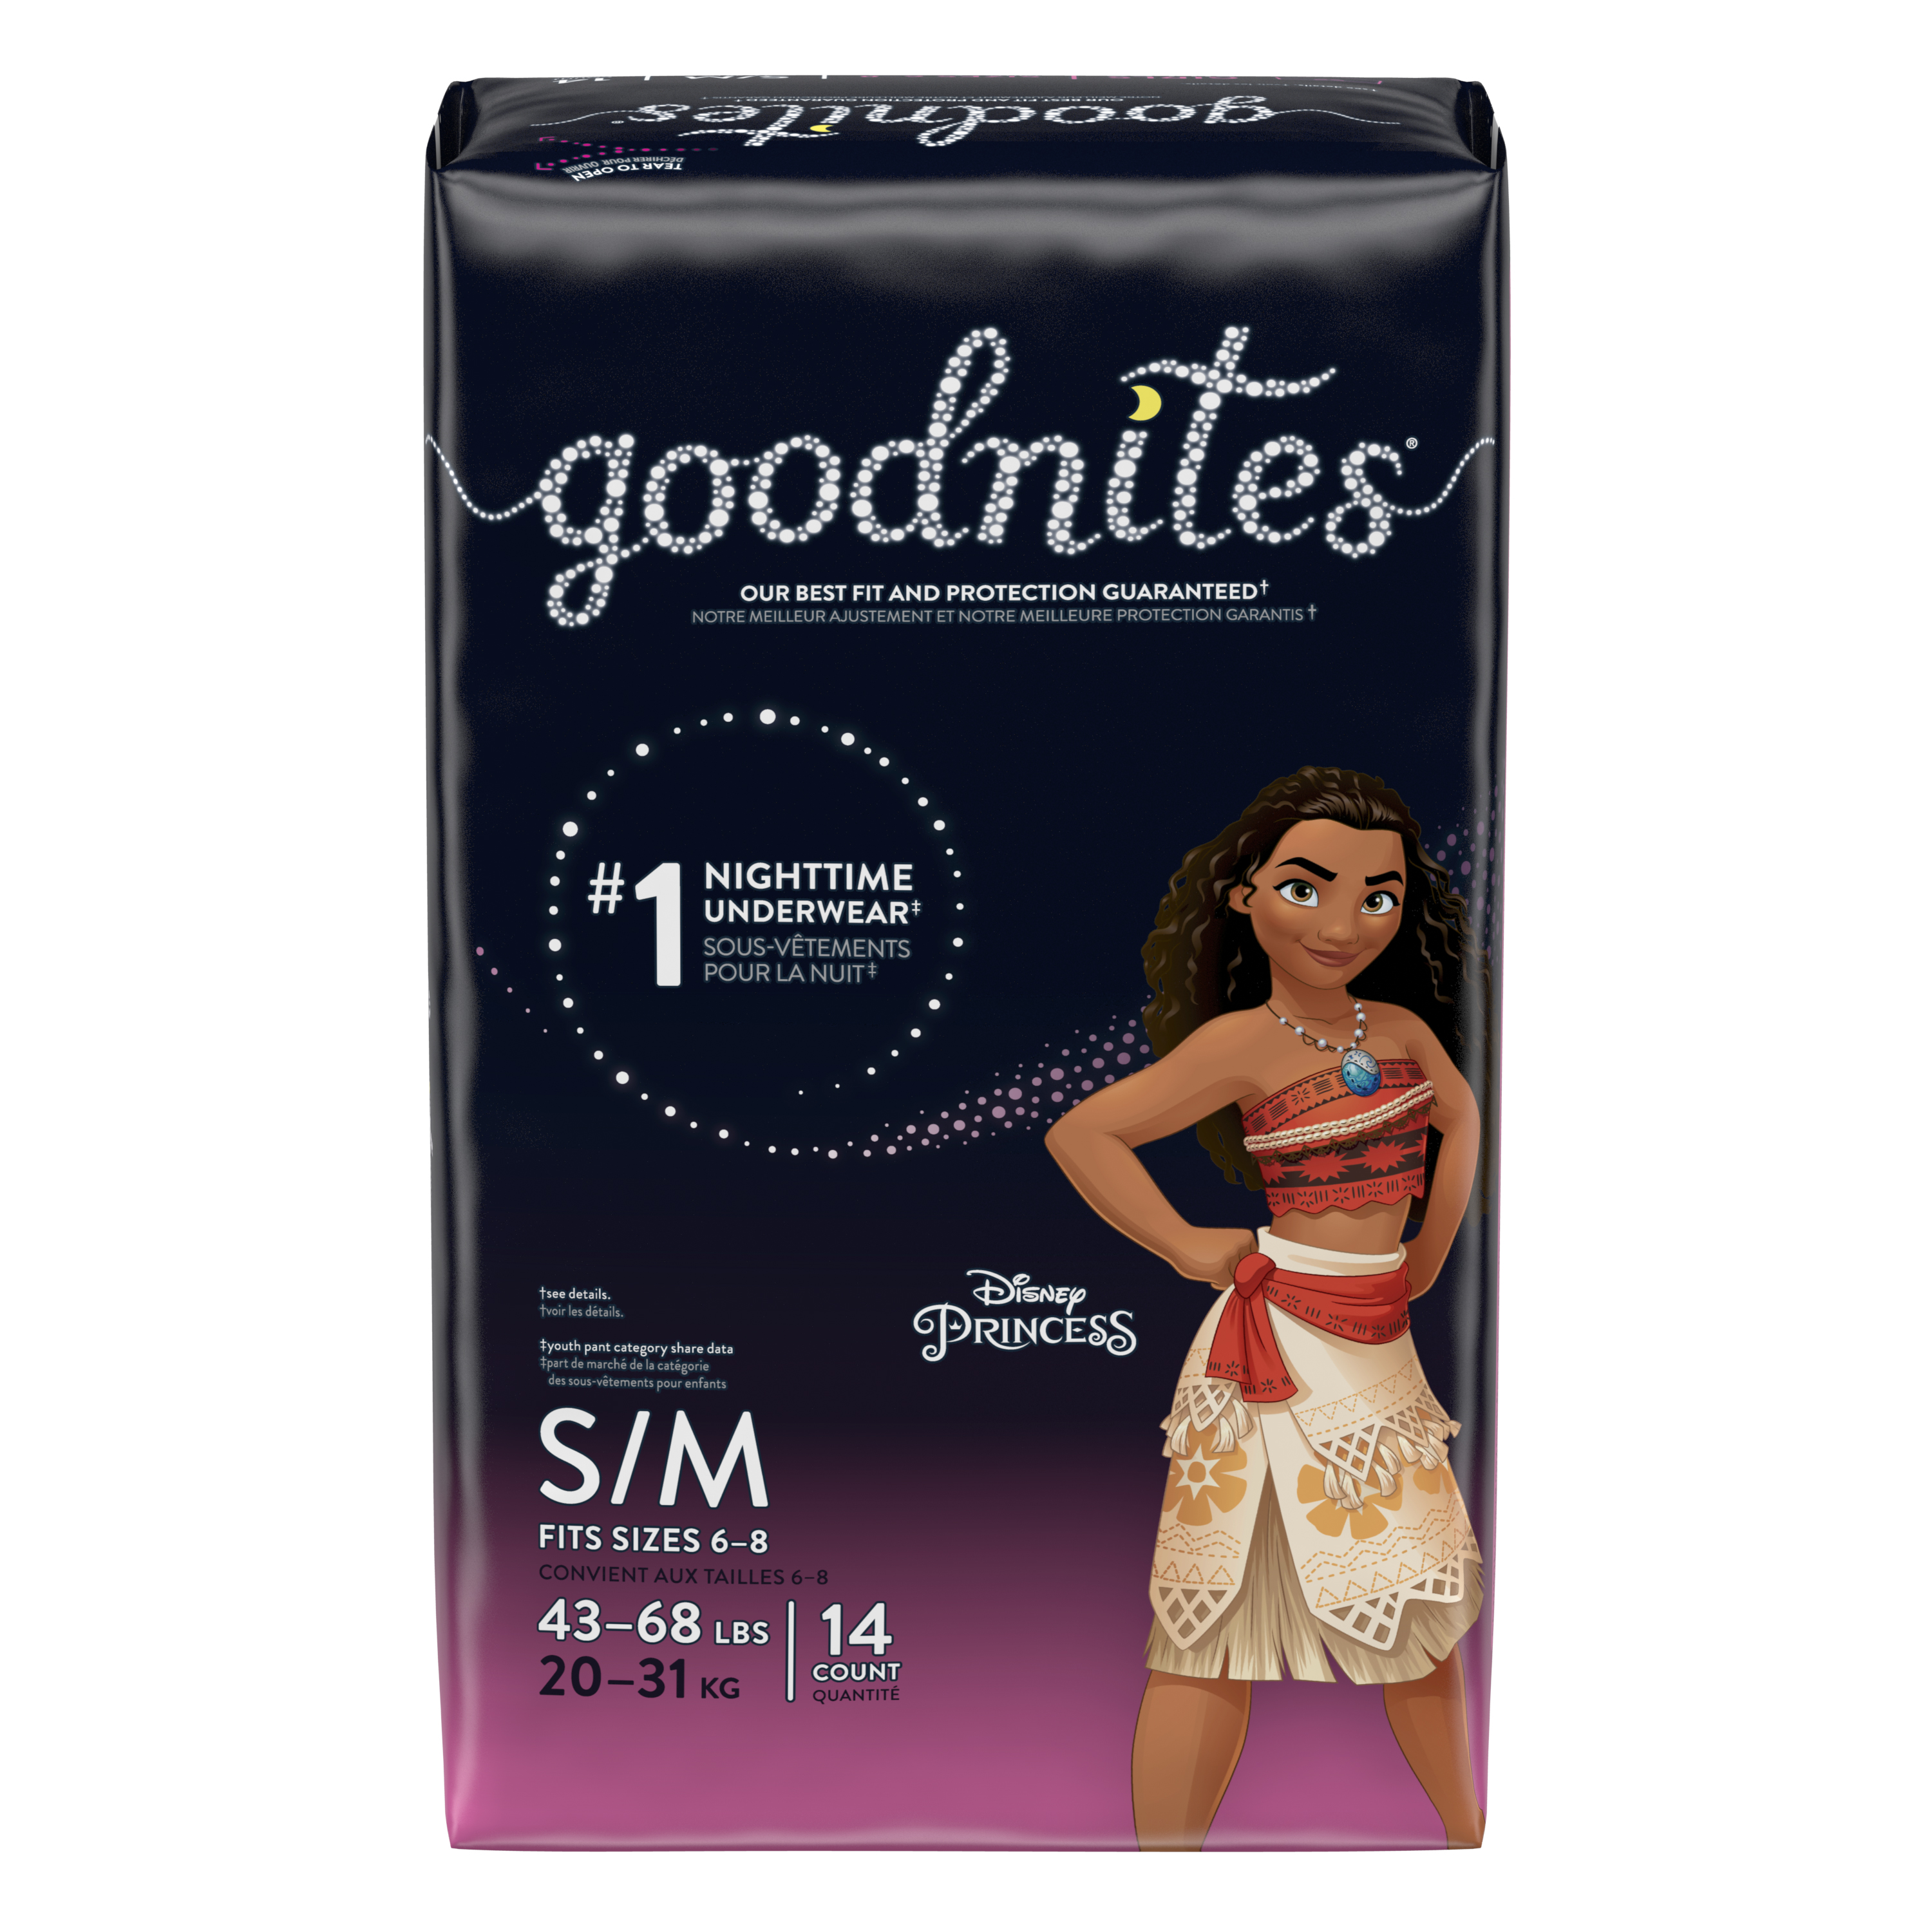 Good Night, starts and ends - Sleepy Diapers Caribbean